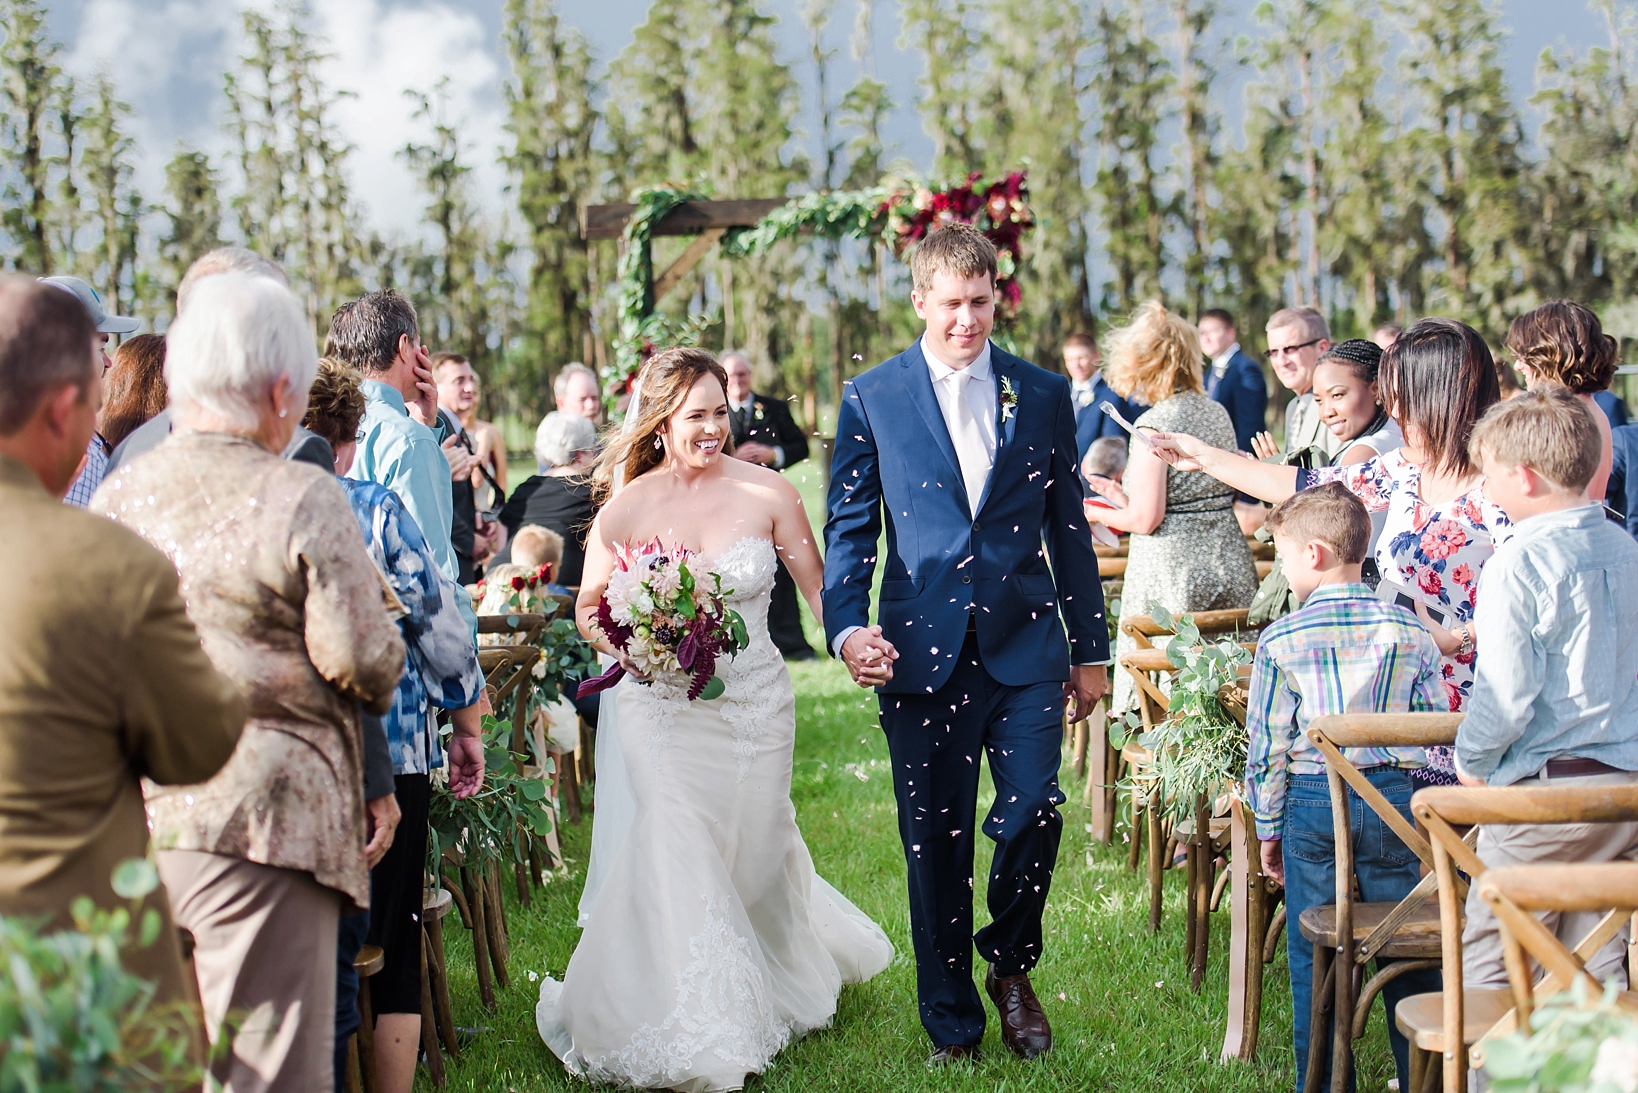 Rose petals are thrown at the couple as they proceed up the aisle